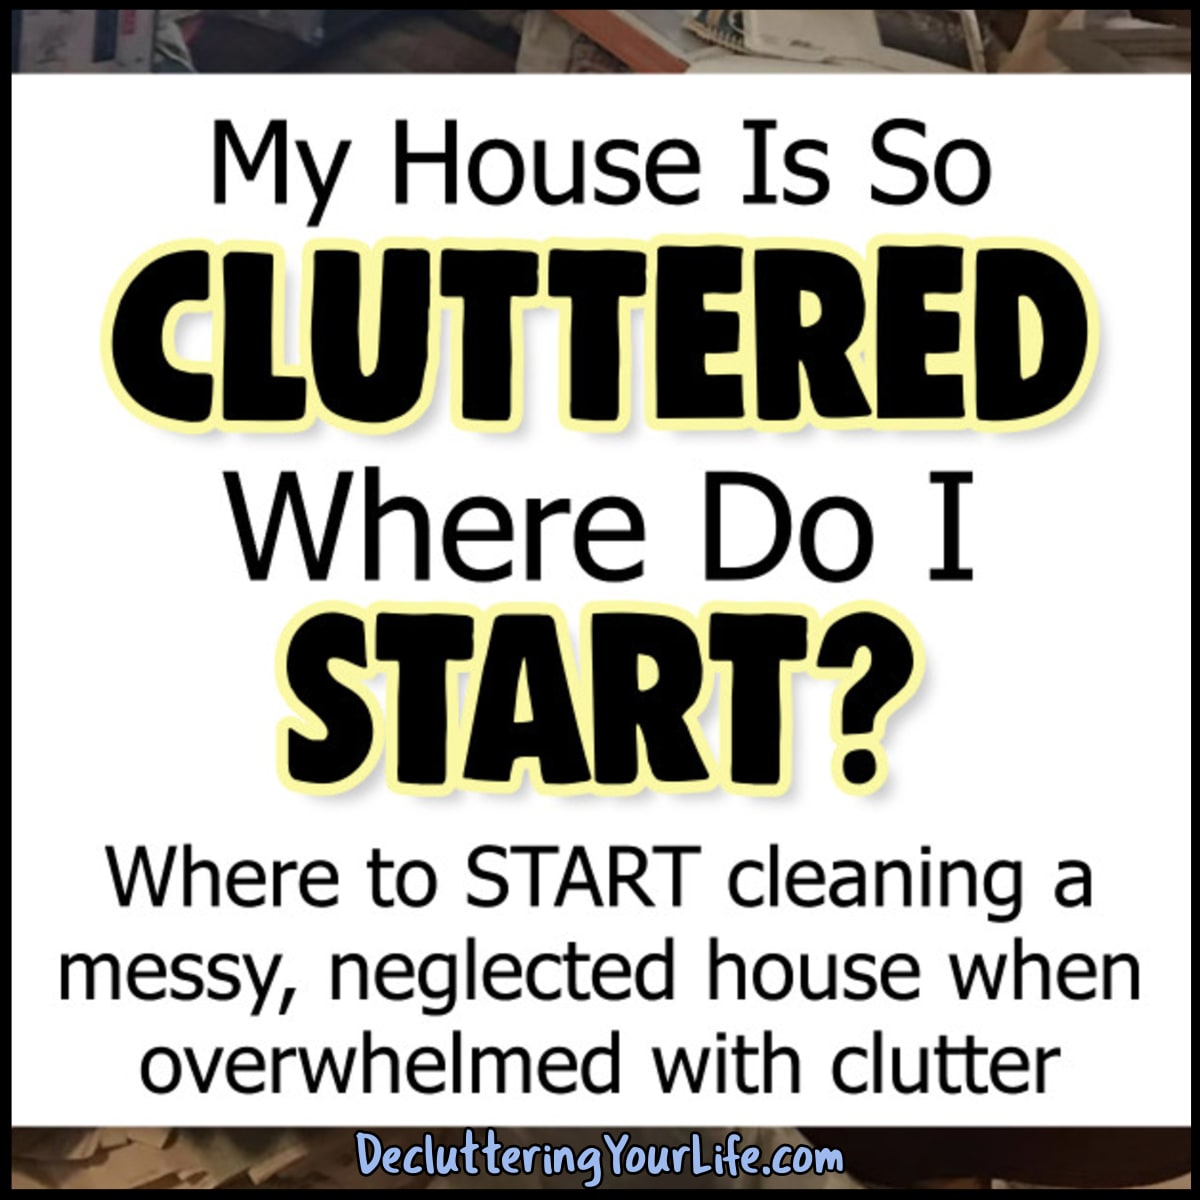 Where to START decluttering and clearing clutter - My House Is a DISASTER and I Don't Know Where To START! How to clean an out of control room